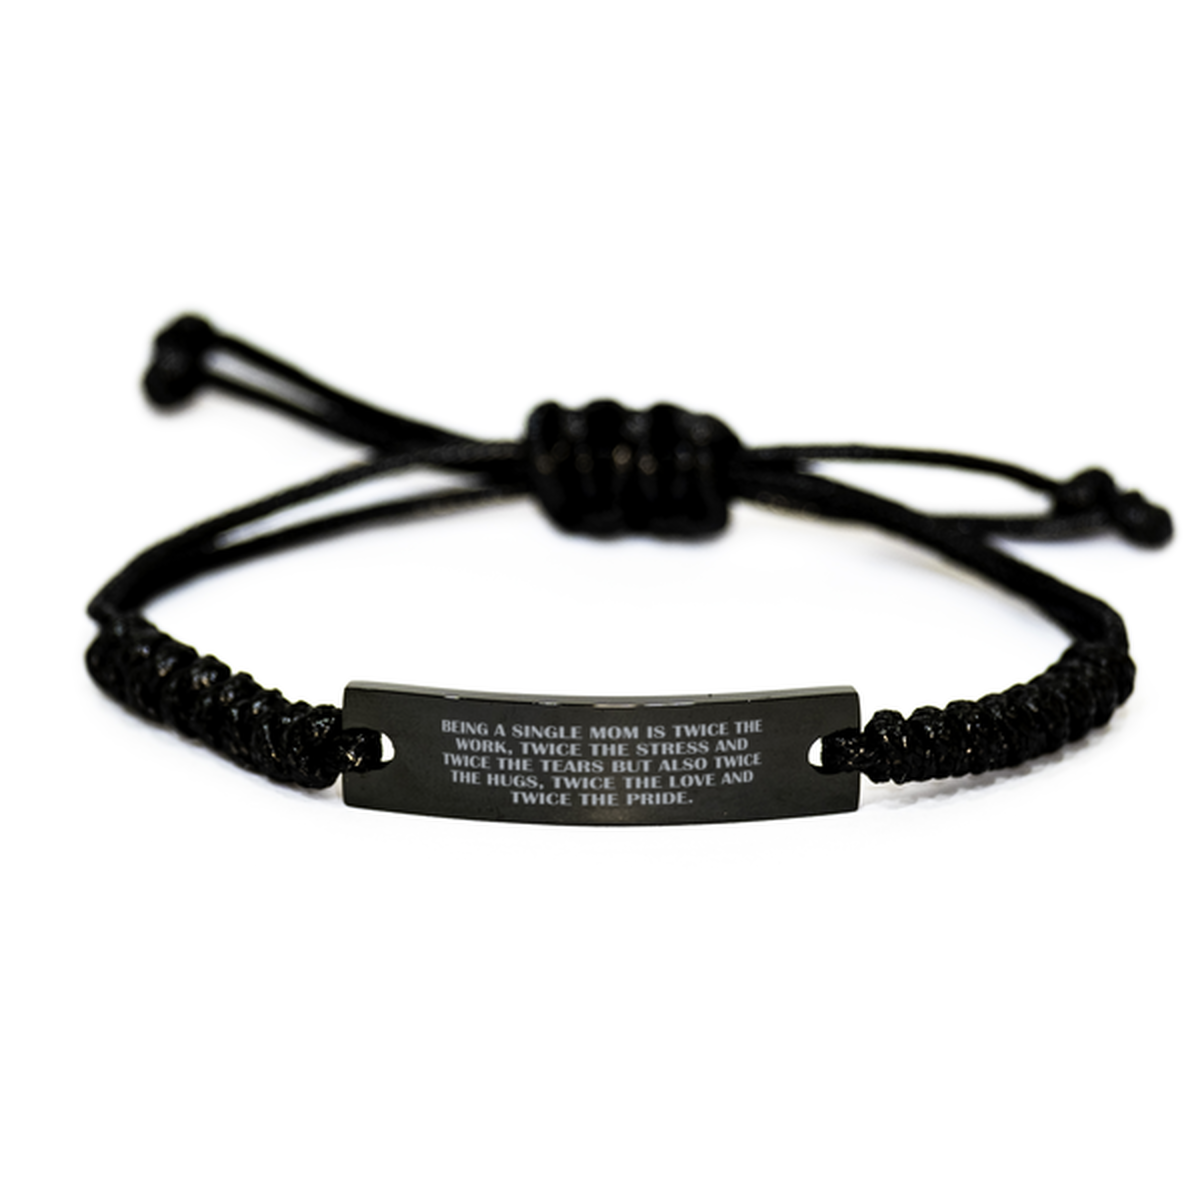 To My Single Mom Rope Bracelet, Twice The Work, Mothers Day Gifts For Single Mom From Friends, Birthday Gifts For Women